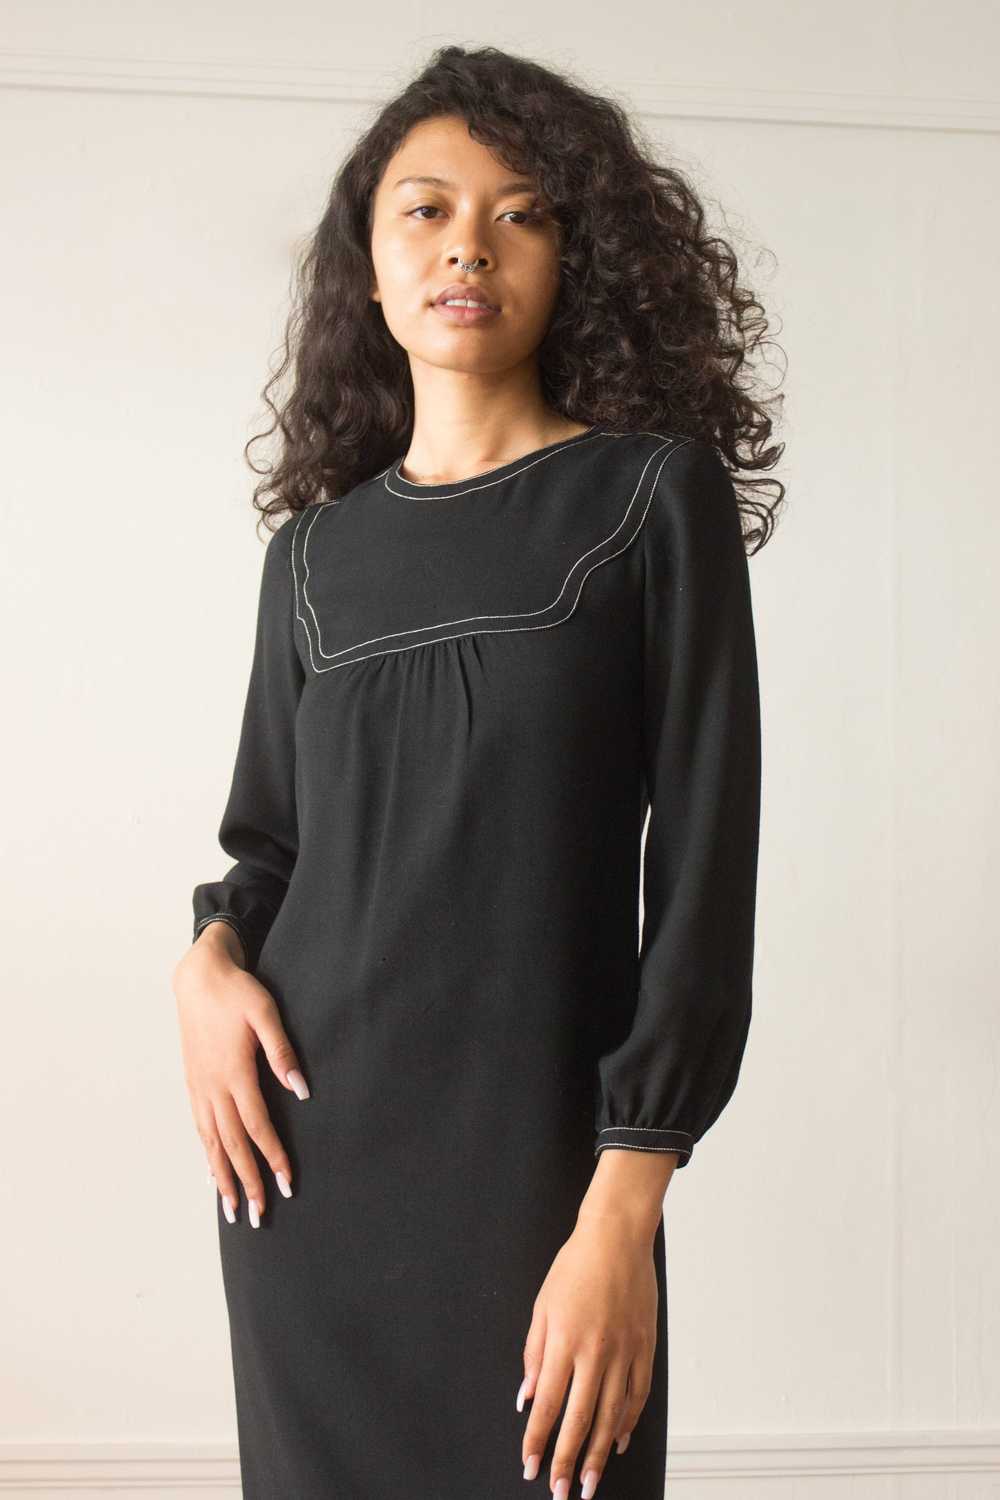 1960s Black Shift Dress with Contrast Stitching - image 2